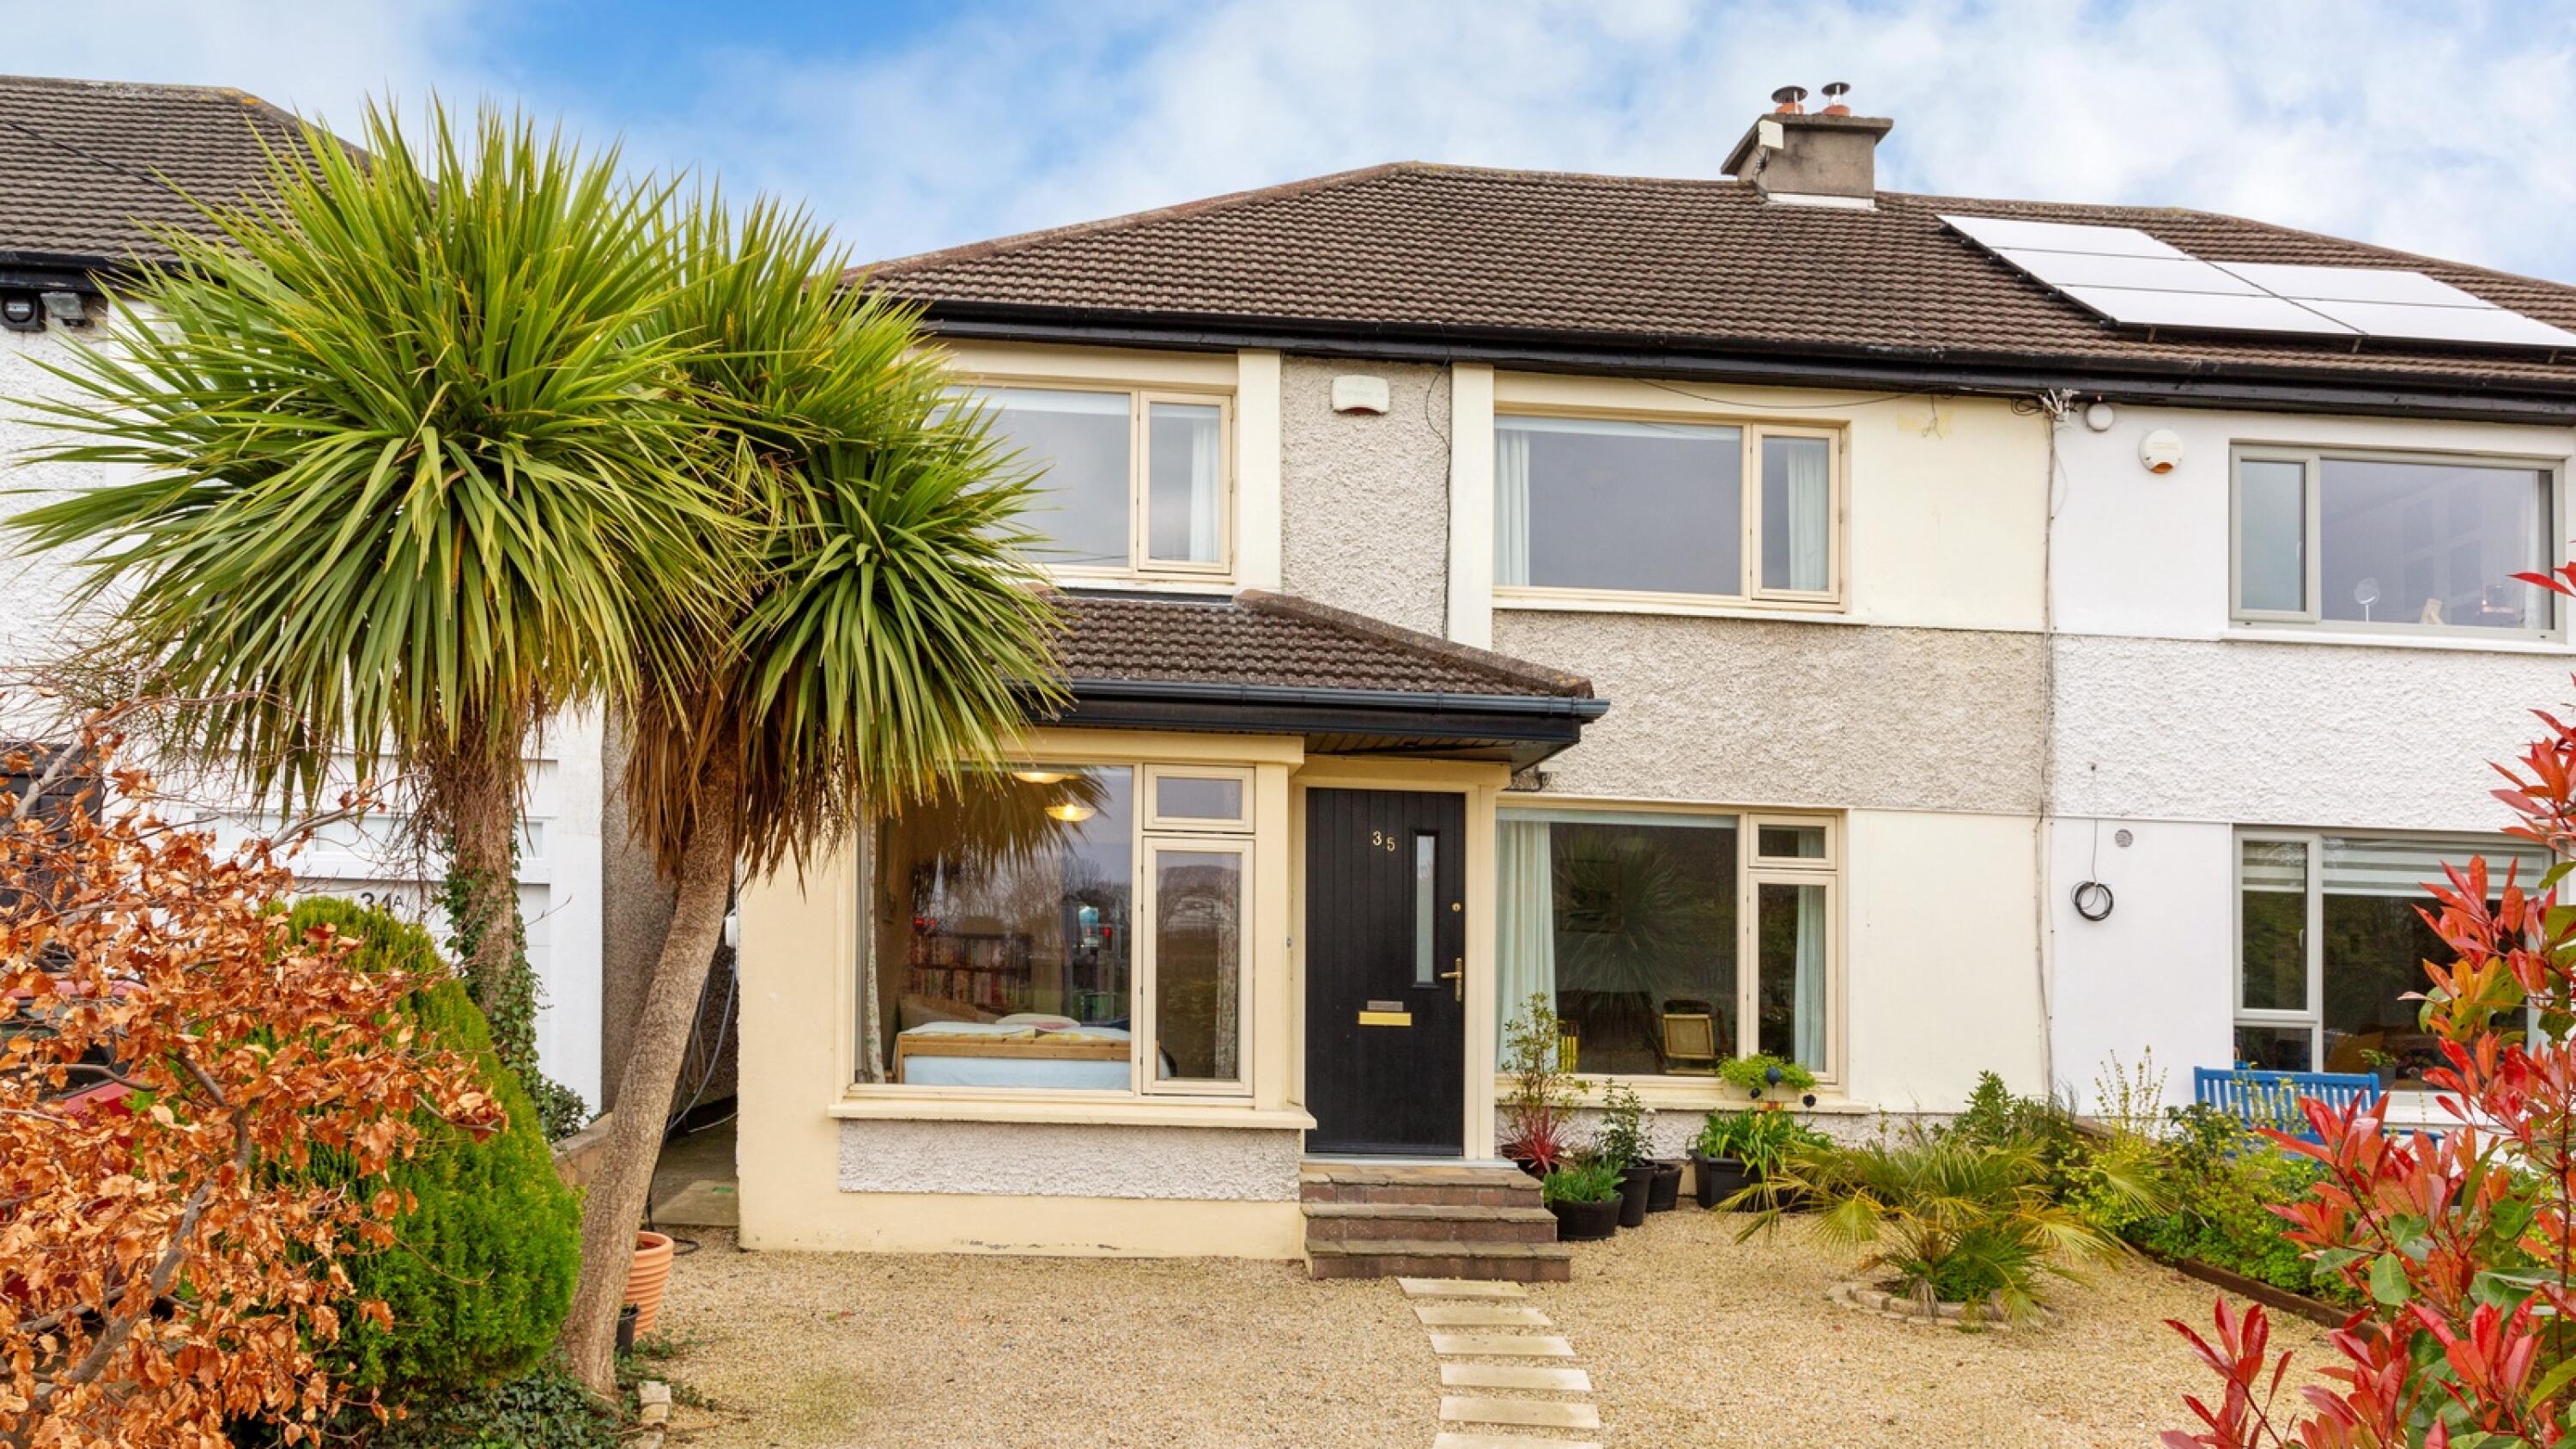 Bright South Co Dublin home with sunny garden and separate home office guides €850,000